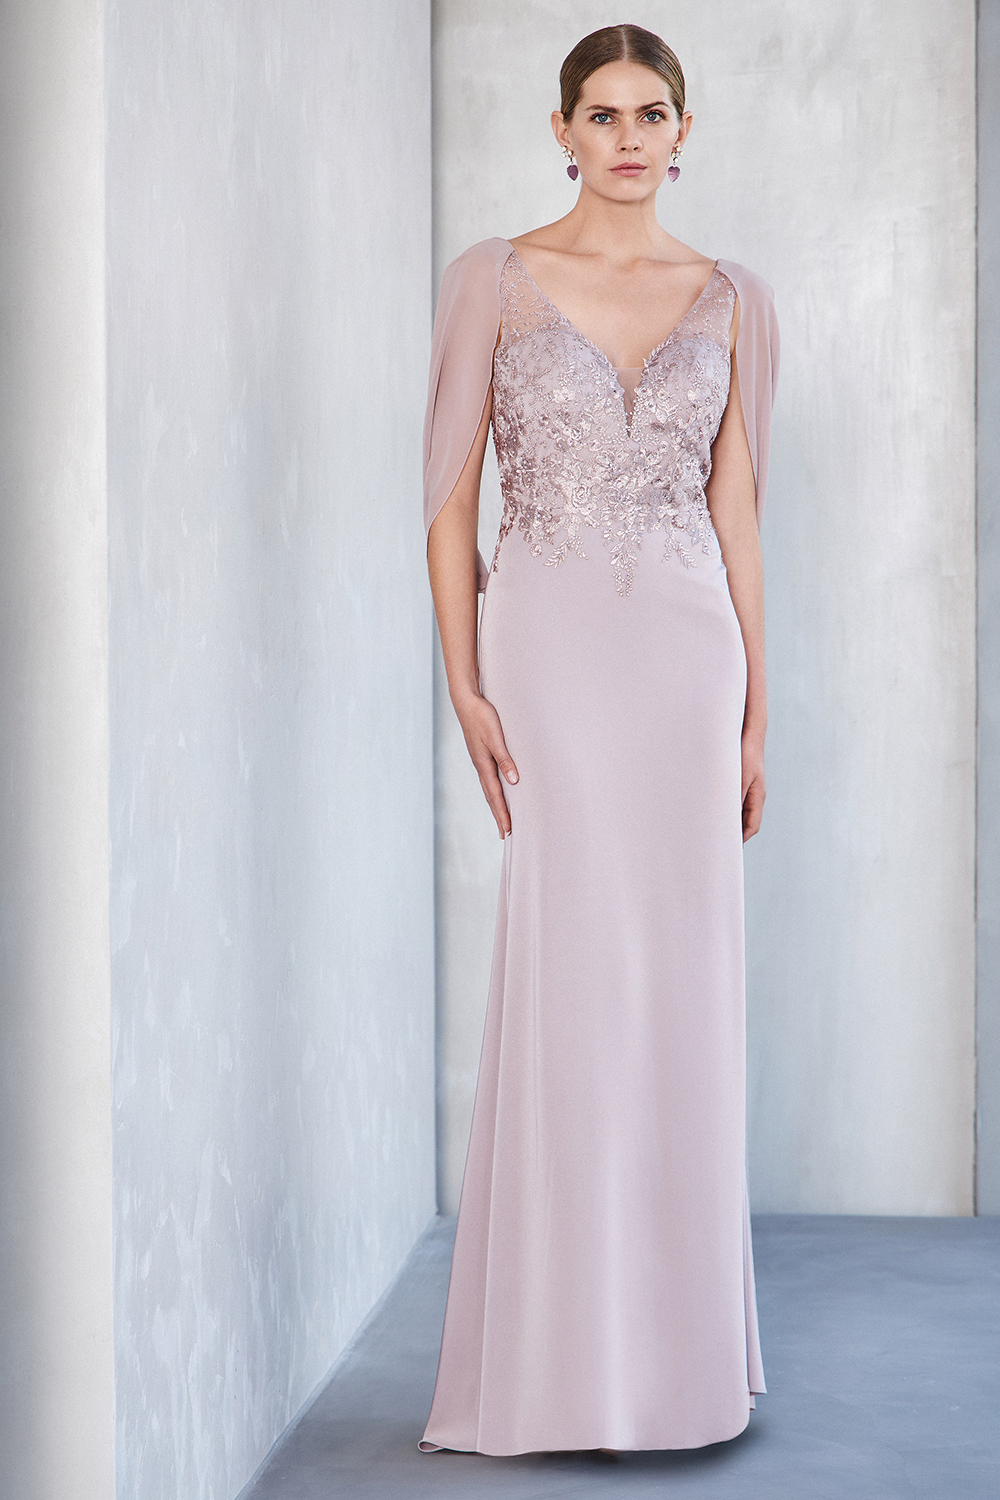 Long evening satin beaded dress with lace top and long sleeves with chiffon